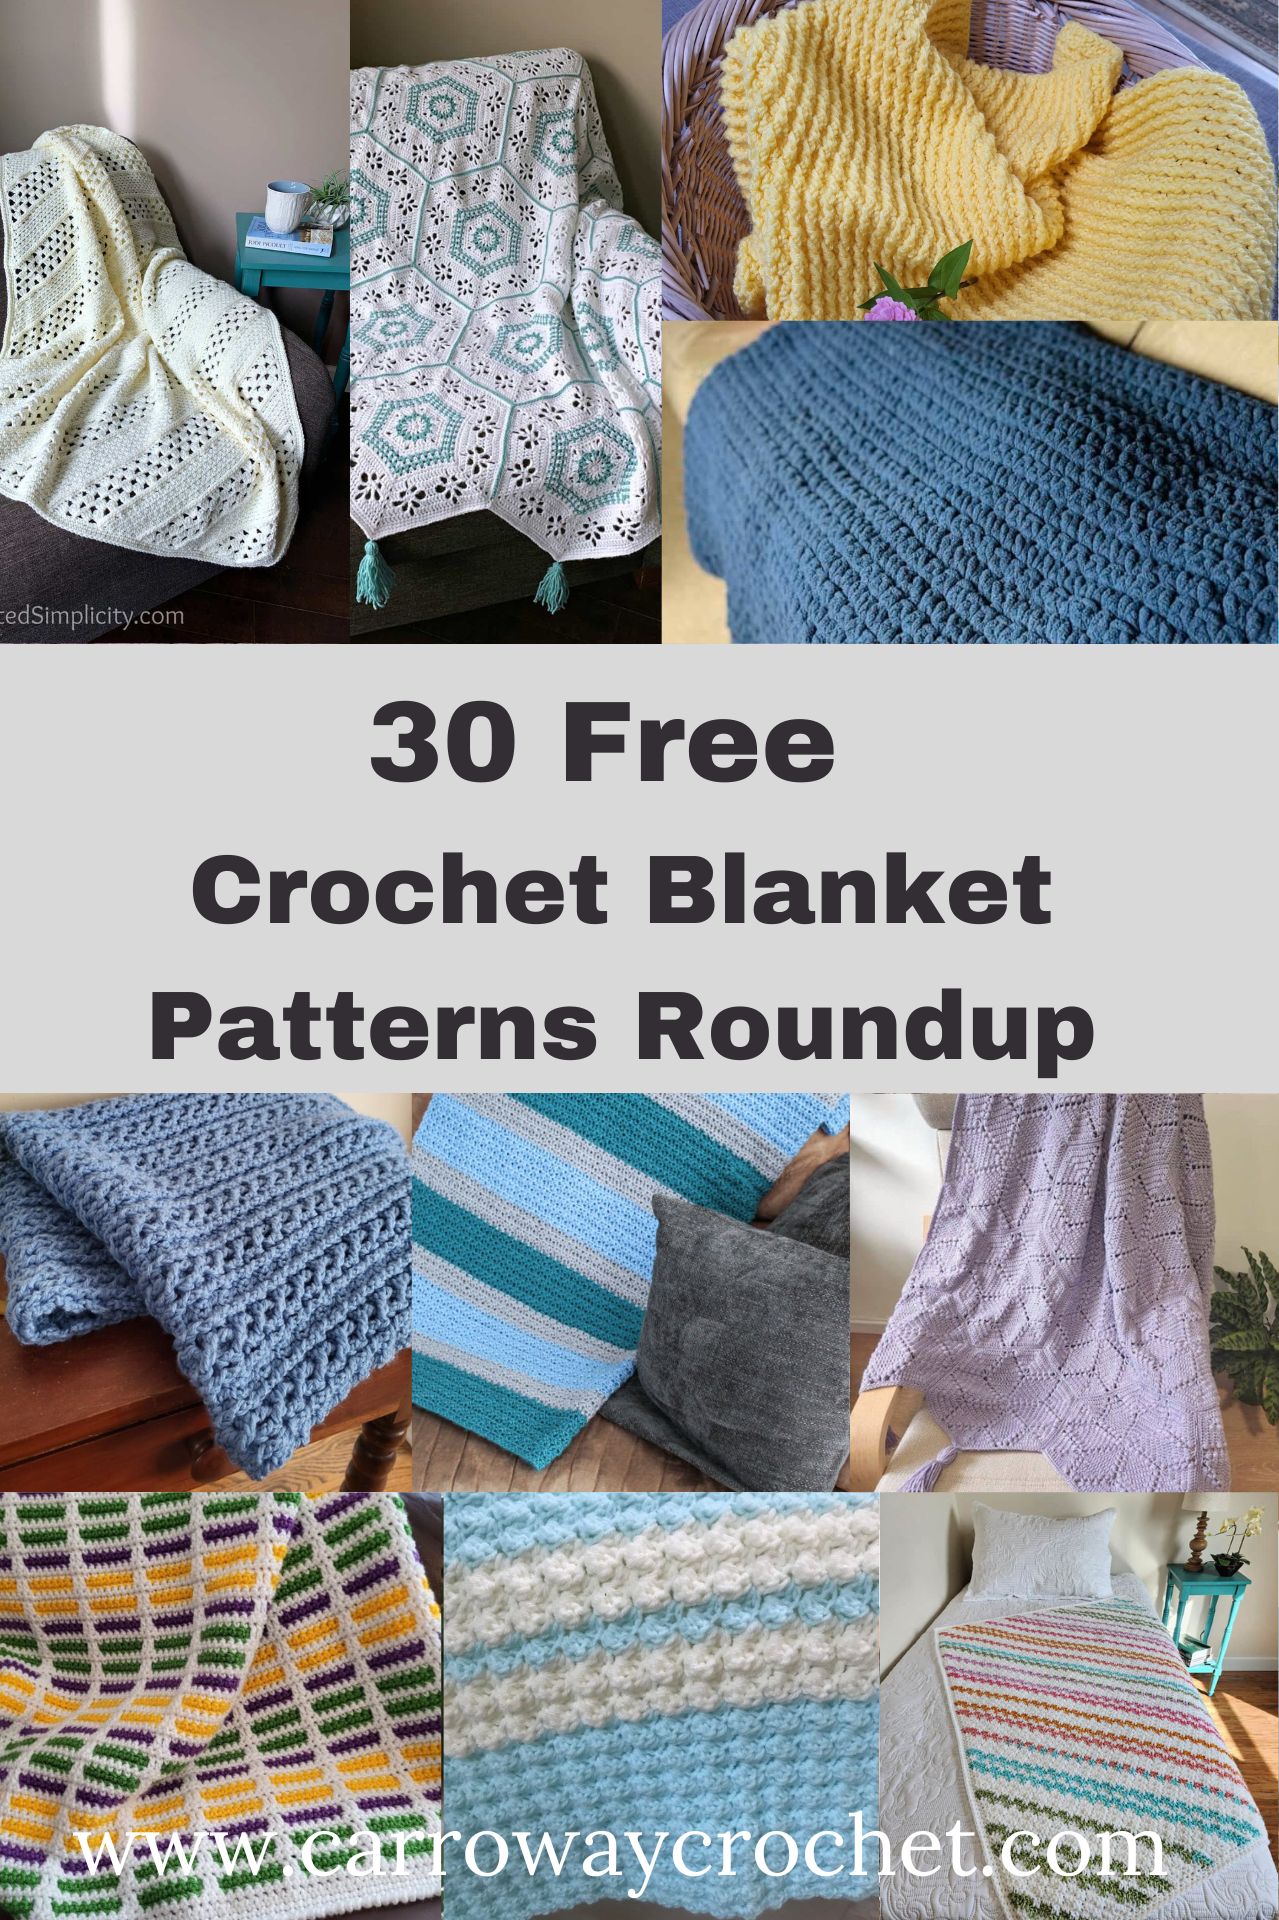 15 Free & Quick Crochet Gifts for Mom - Made by Gootie